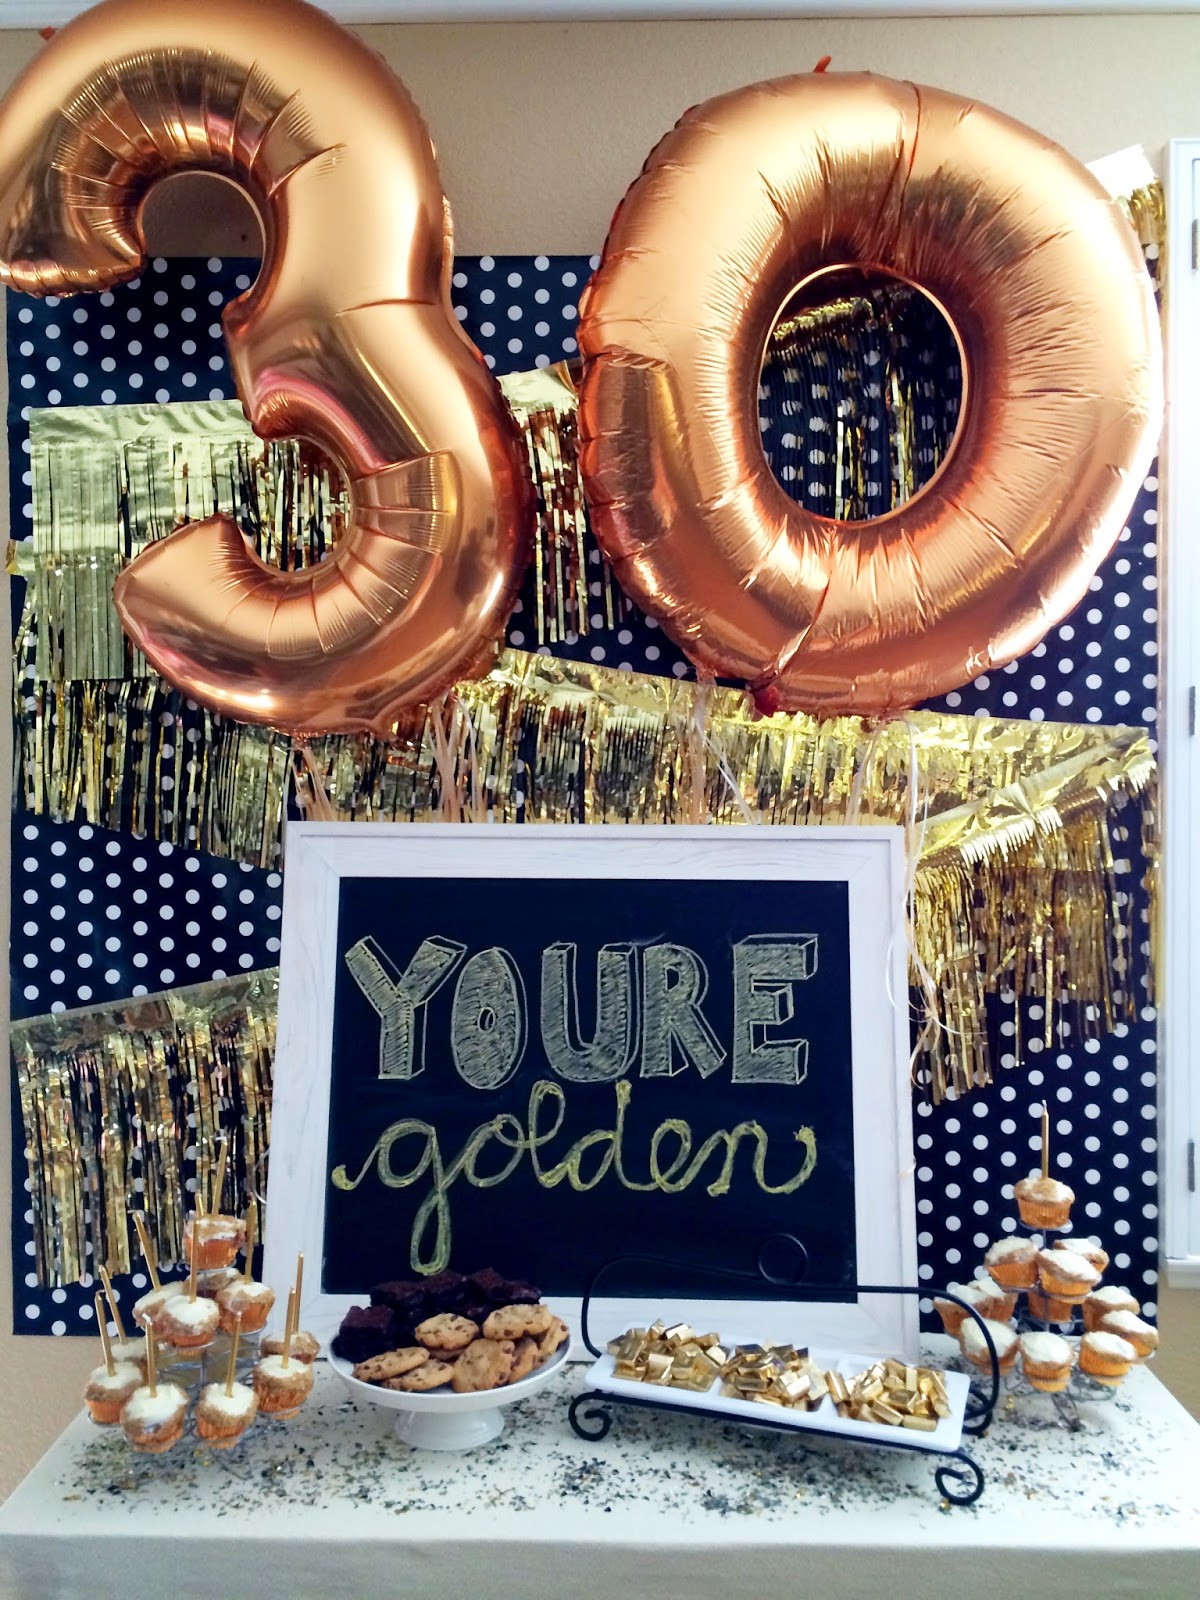 30 Birthday Party Ideas
 7 Clever Themes for a Smashing 30th Birthday Party